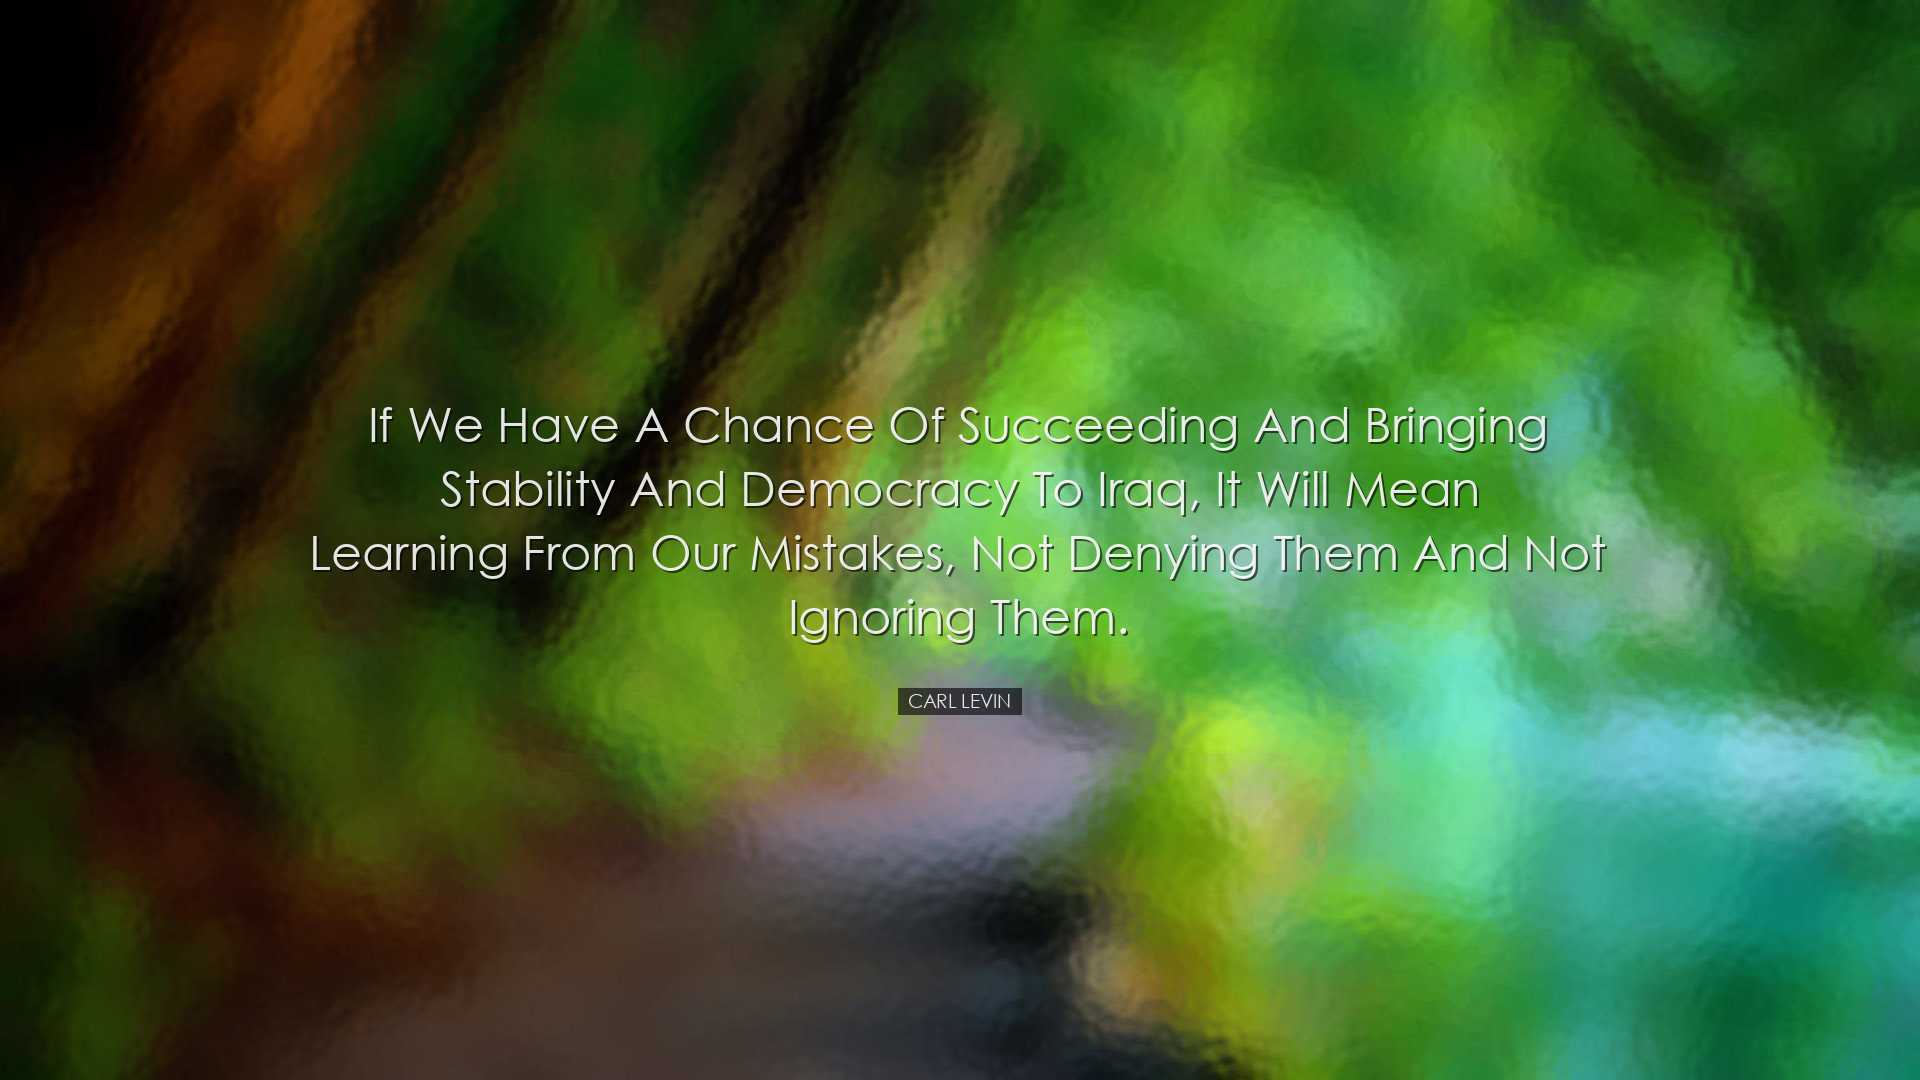 If we have a chance of succeeding and bringing stability and democ